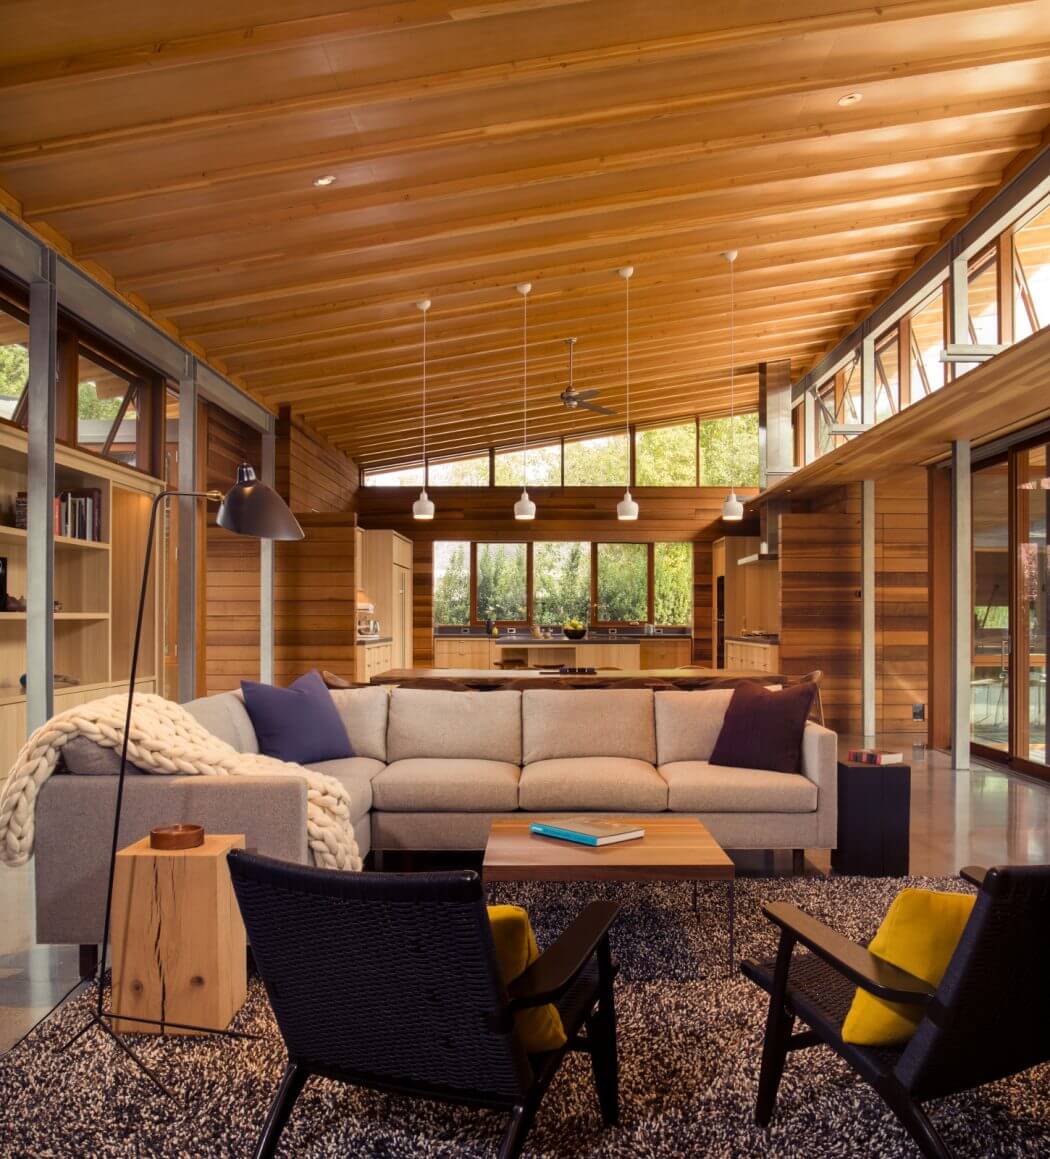 A cozy, rustic living room with a wooden ceiling, large windows, and modern furnishings.